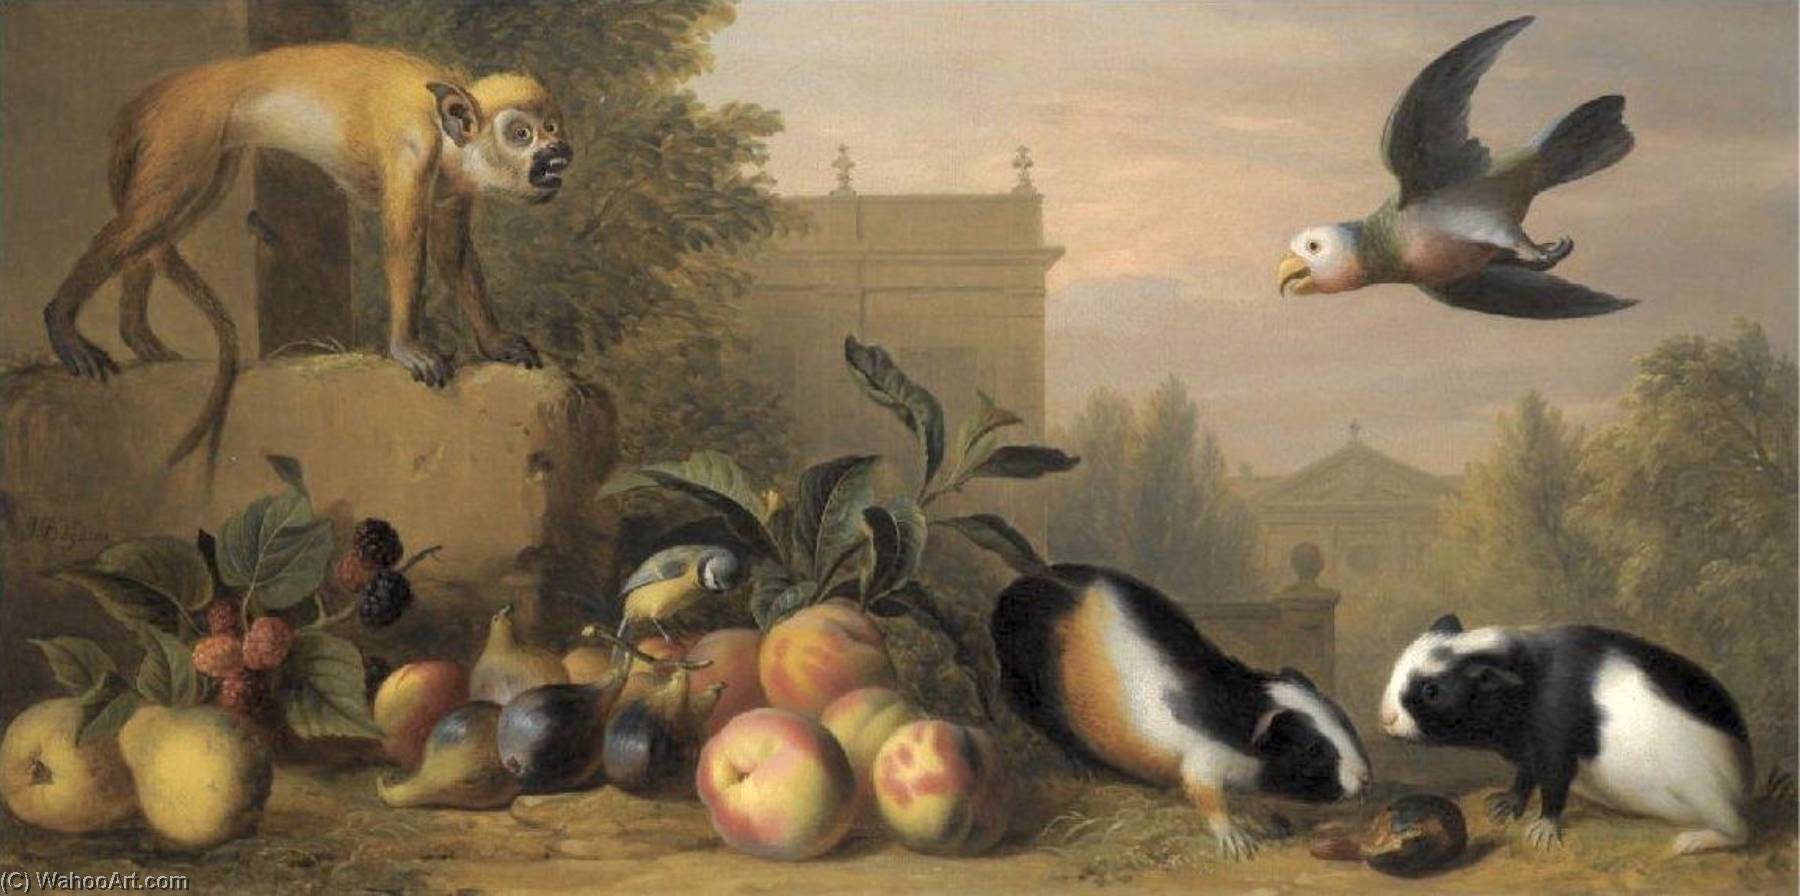 WikiOO.org - Enciclopédia das Belas Artes - Pintura, Arte por Jakob Bogdani - Capuchin squirrel monkey, two guinea pigs, a blue tit and an Amazon St. Vincent parrot with Peaches, Figs and Pears in a landscape